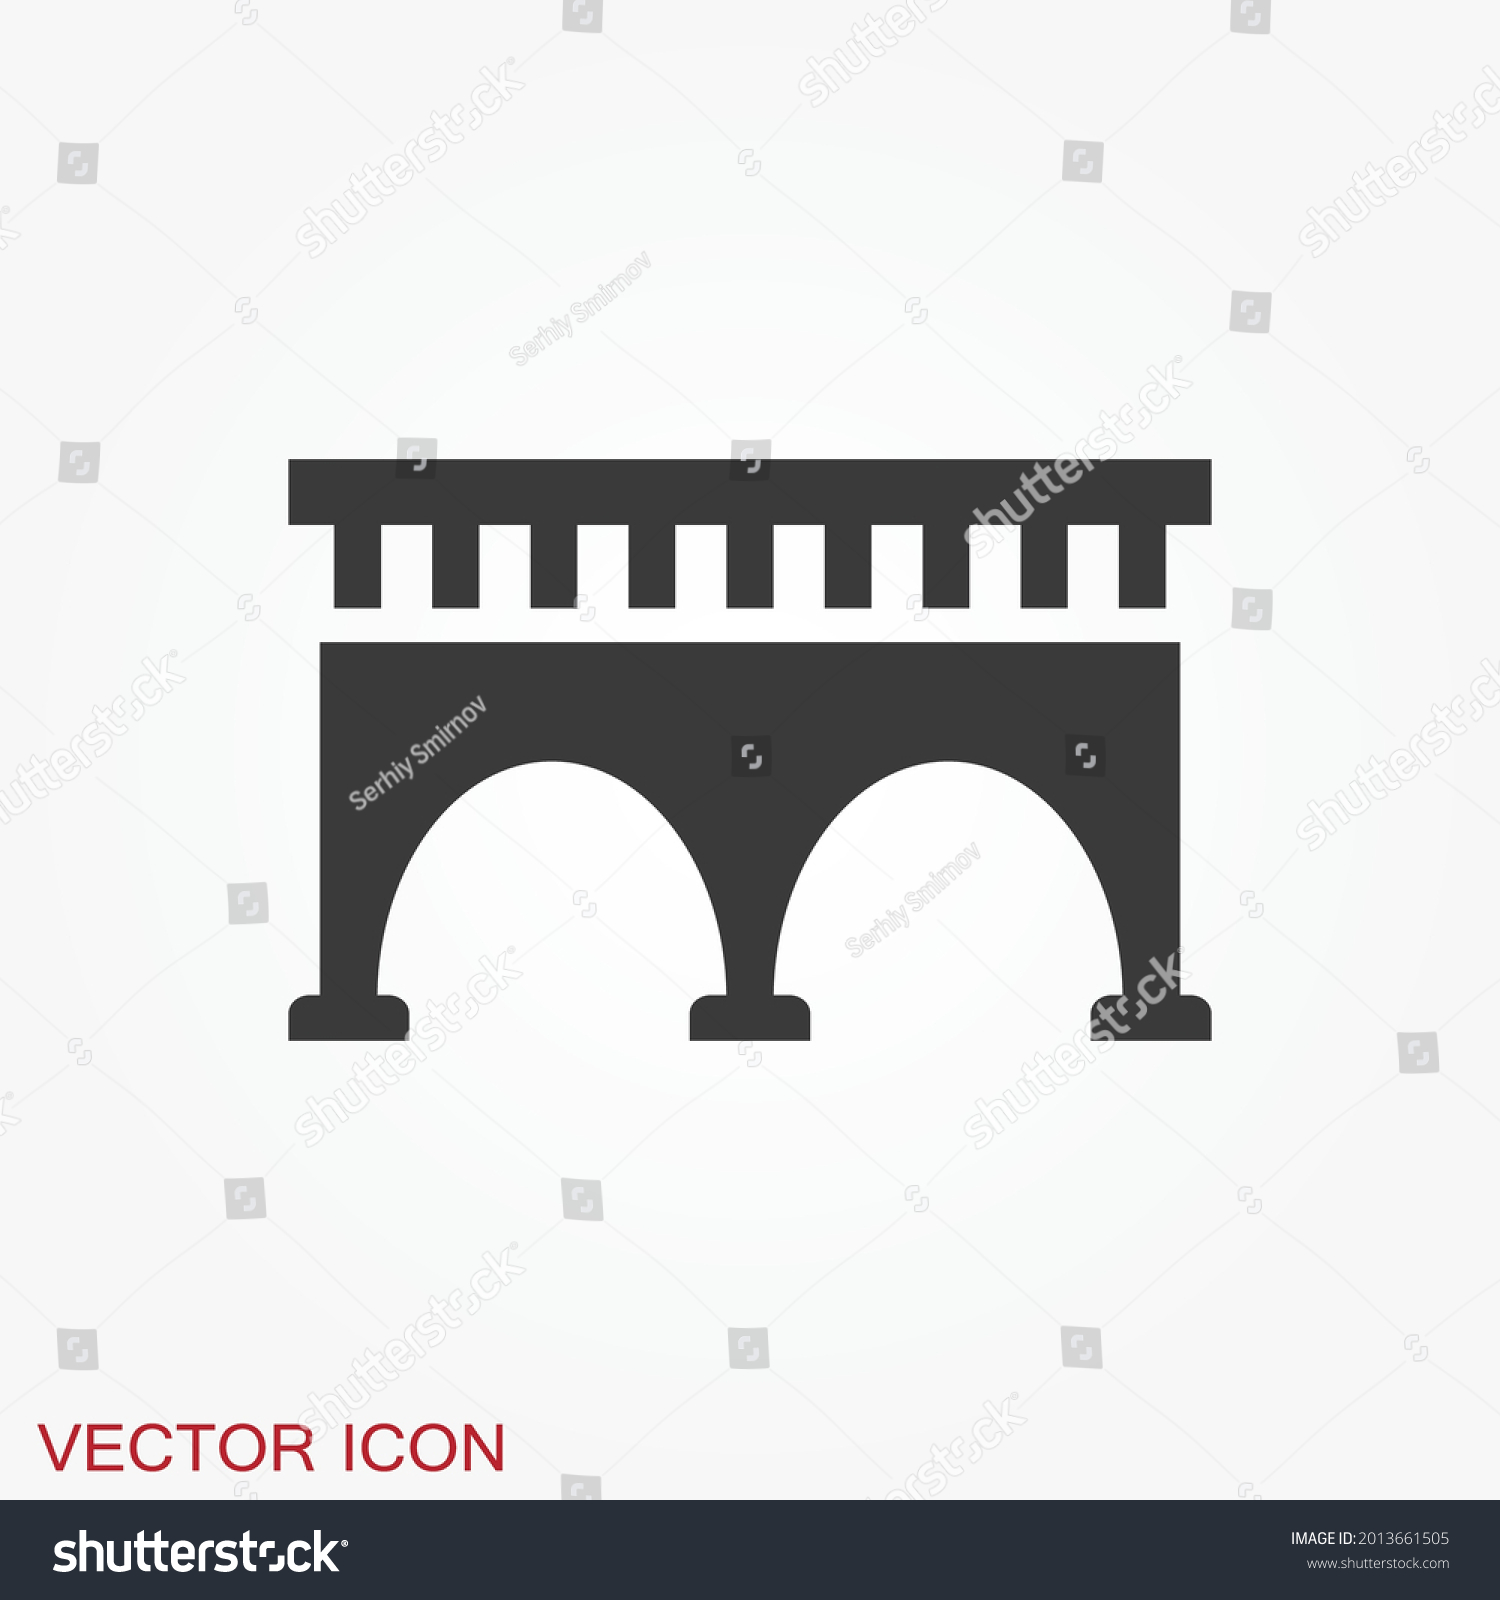 SVG of Bridge icon in flat style. Road business concept. svg